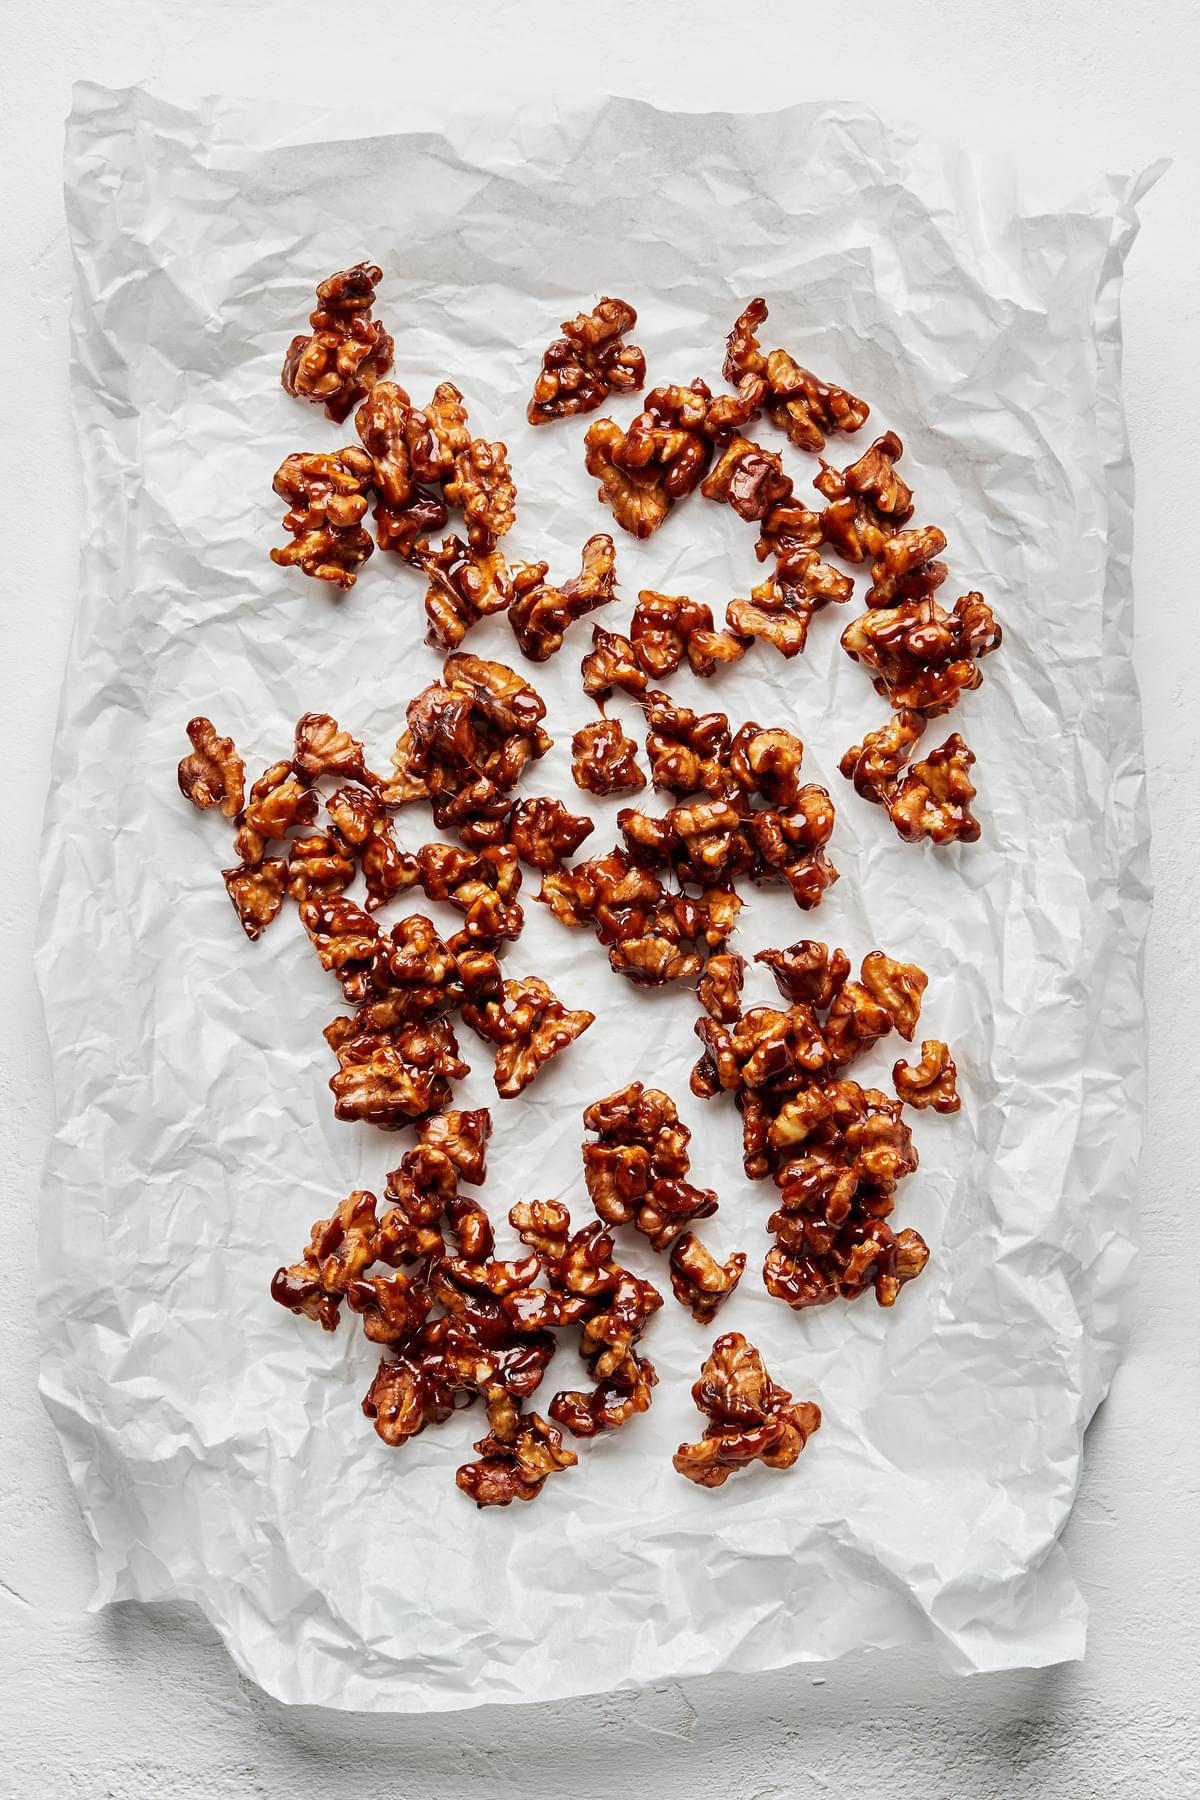 homemade candied walnuts cooling on parchment paper